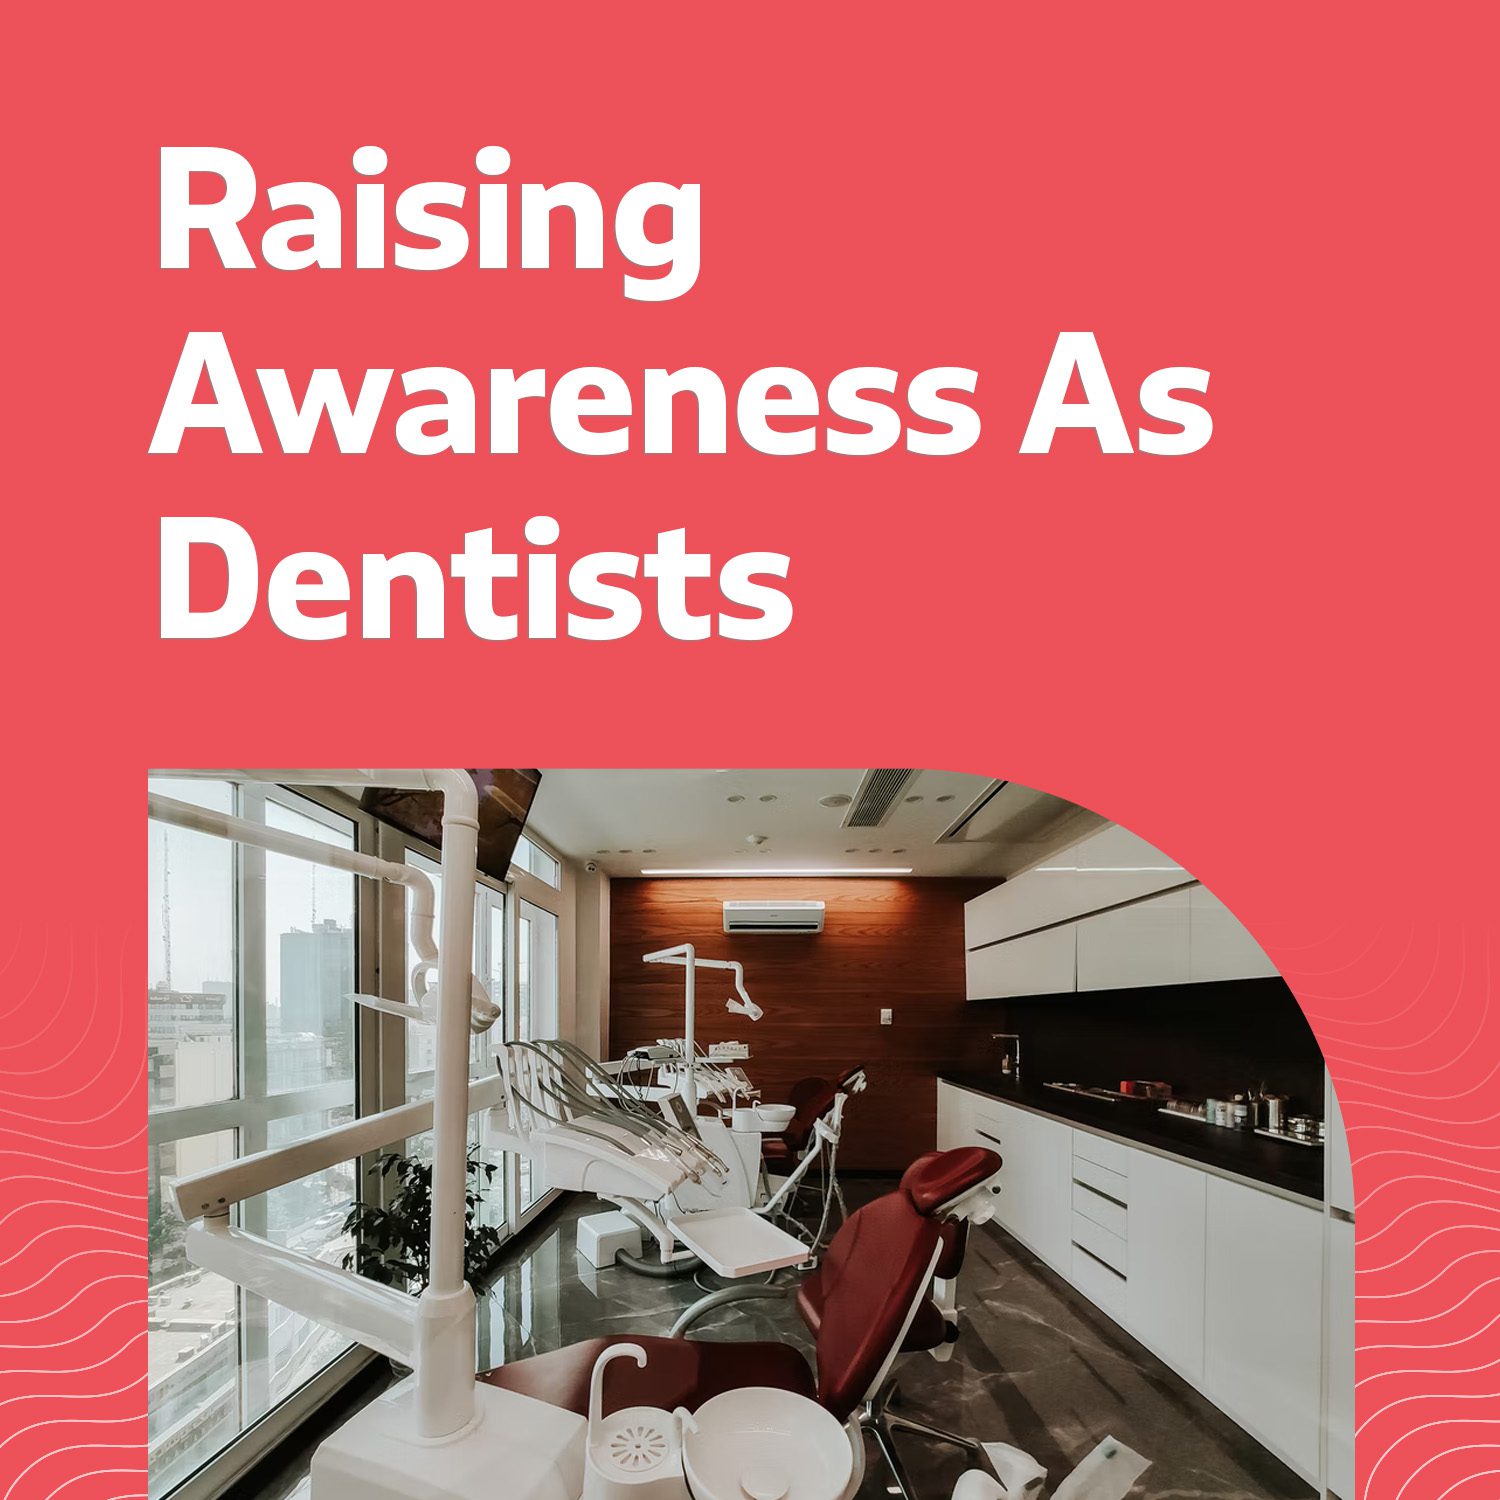 Raising Awareness About Dentistry Treatments